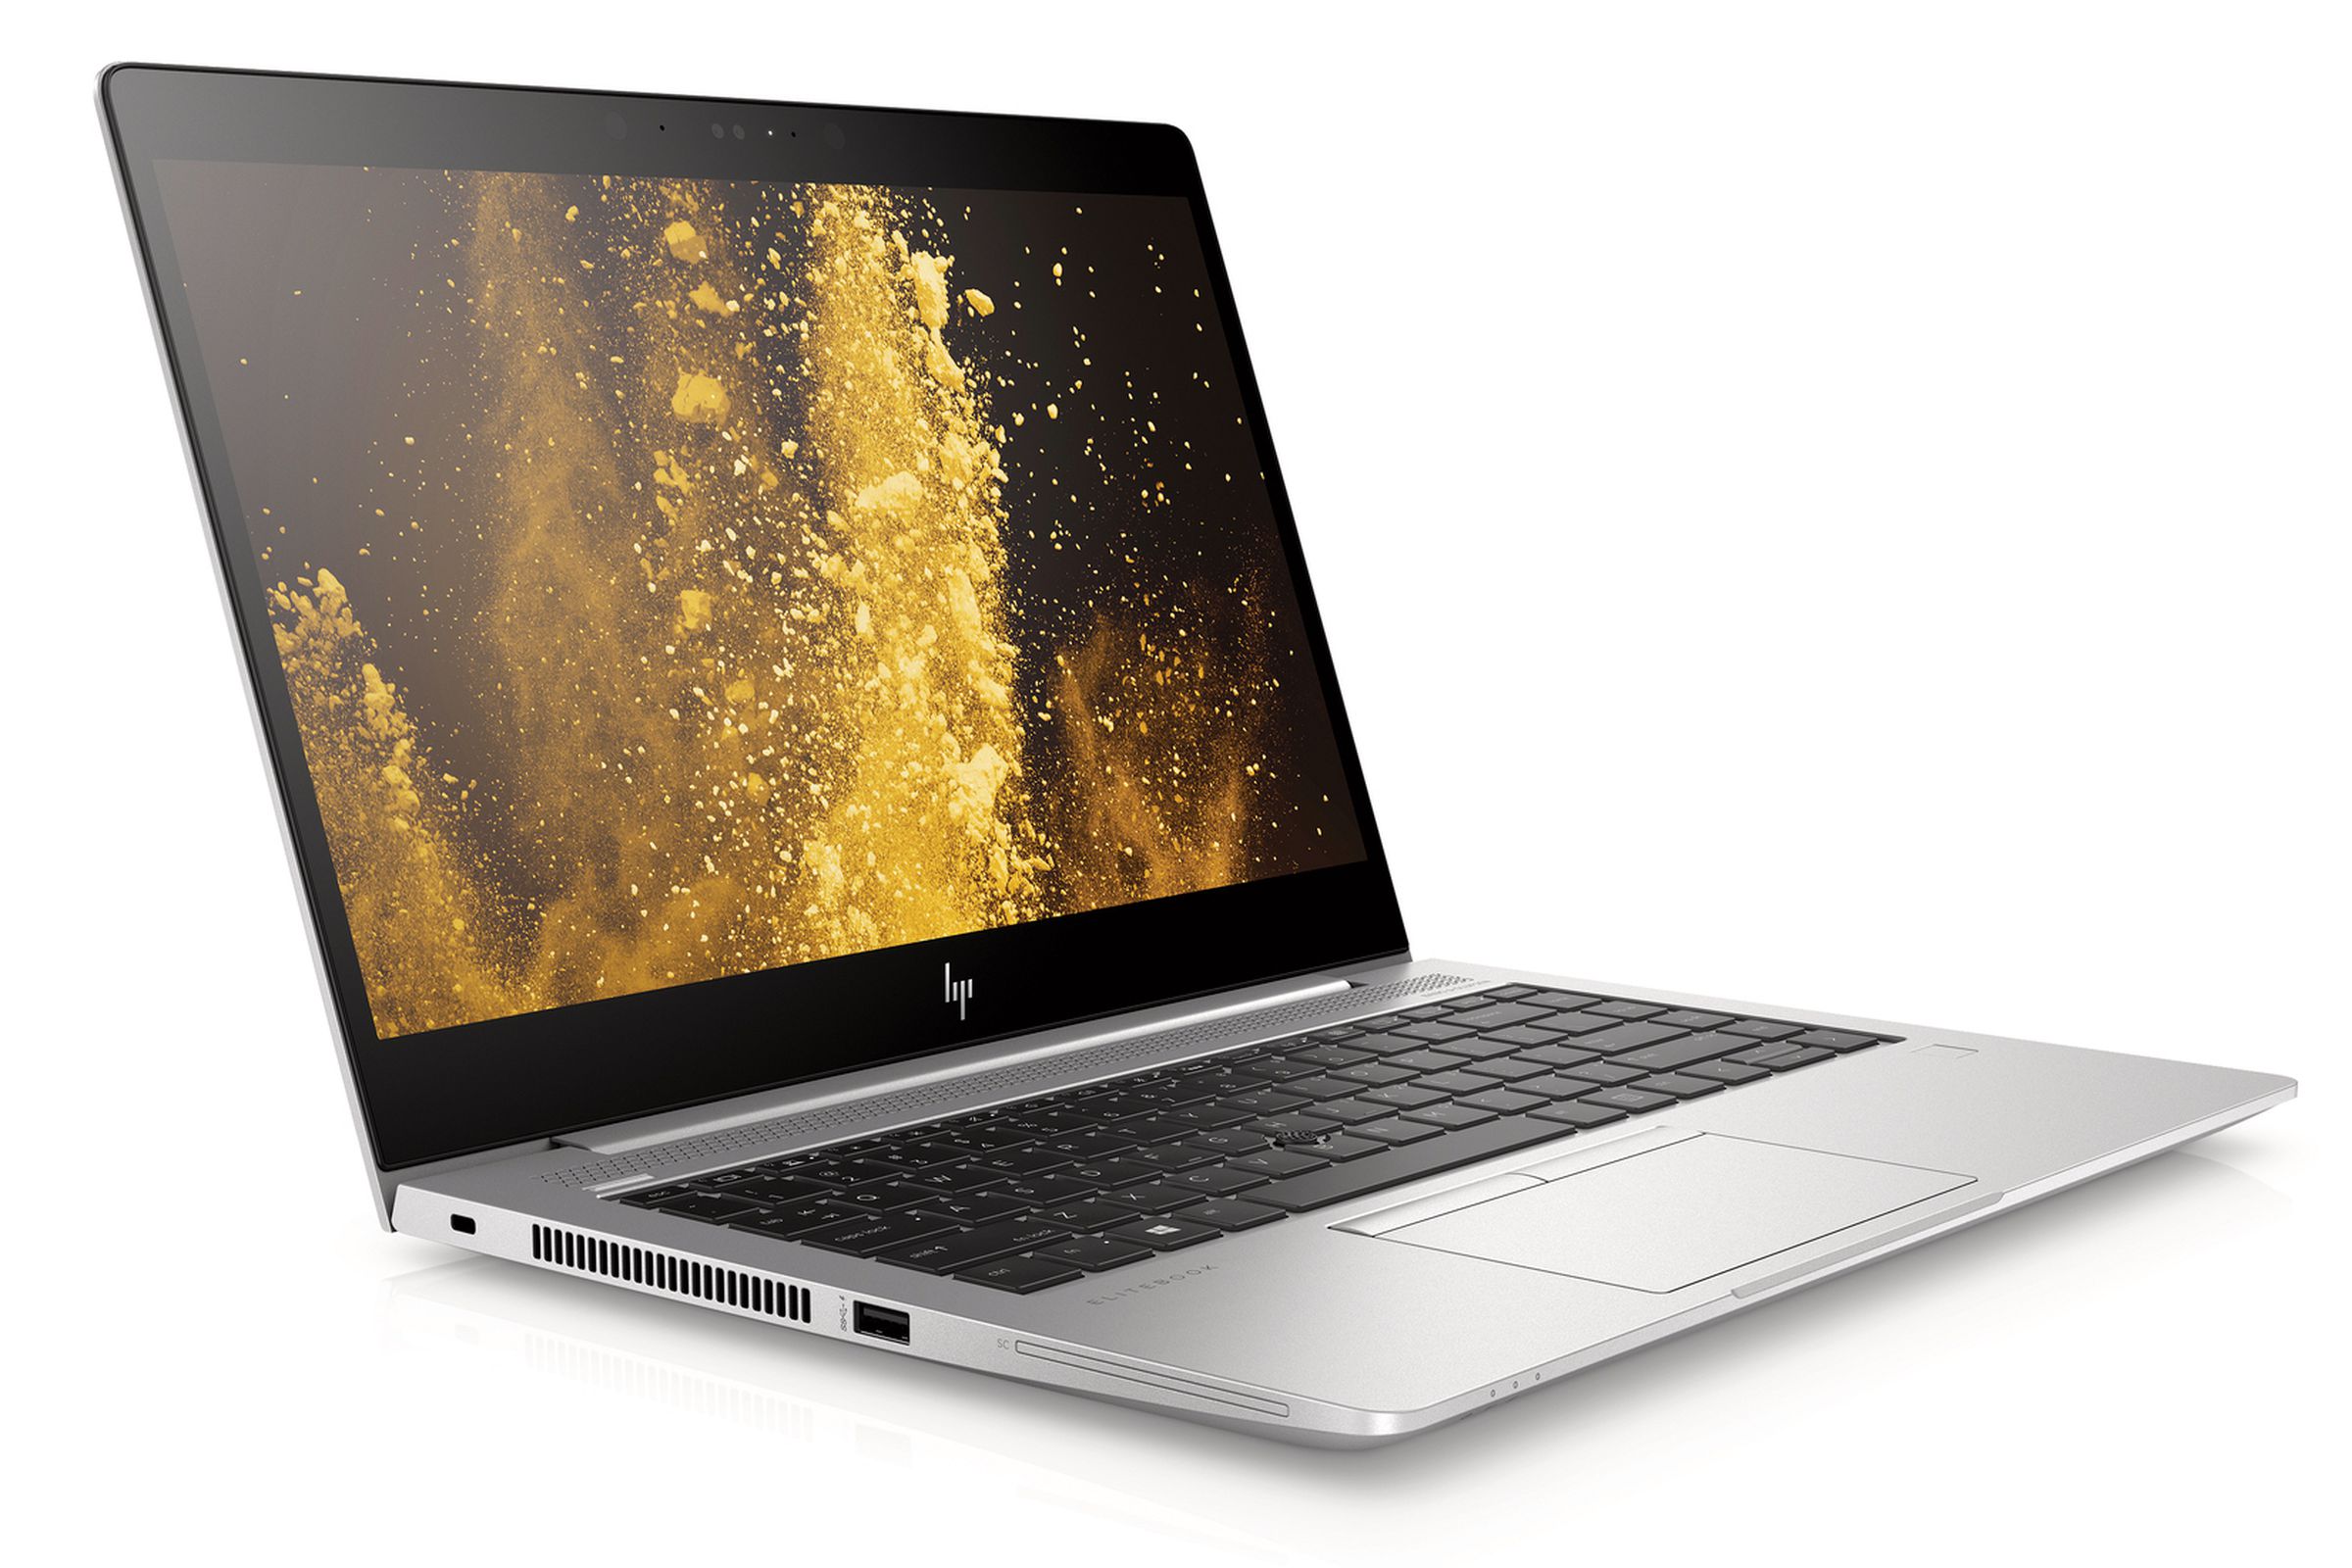 The HP EliteBook 840 with touchscreen (and no webcam cover)